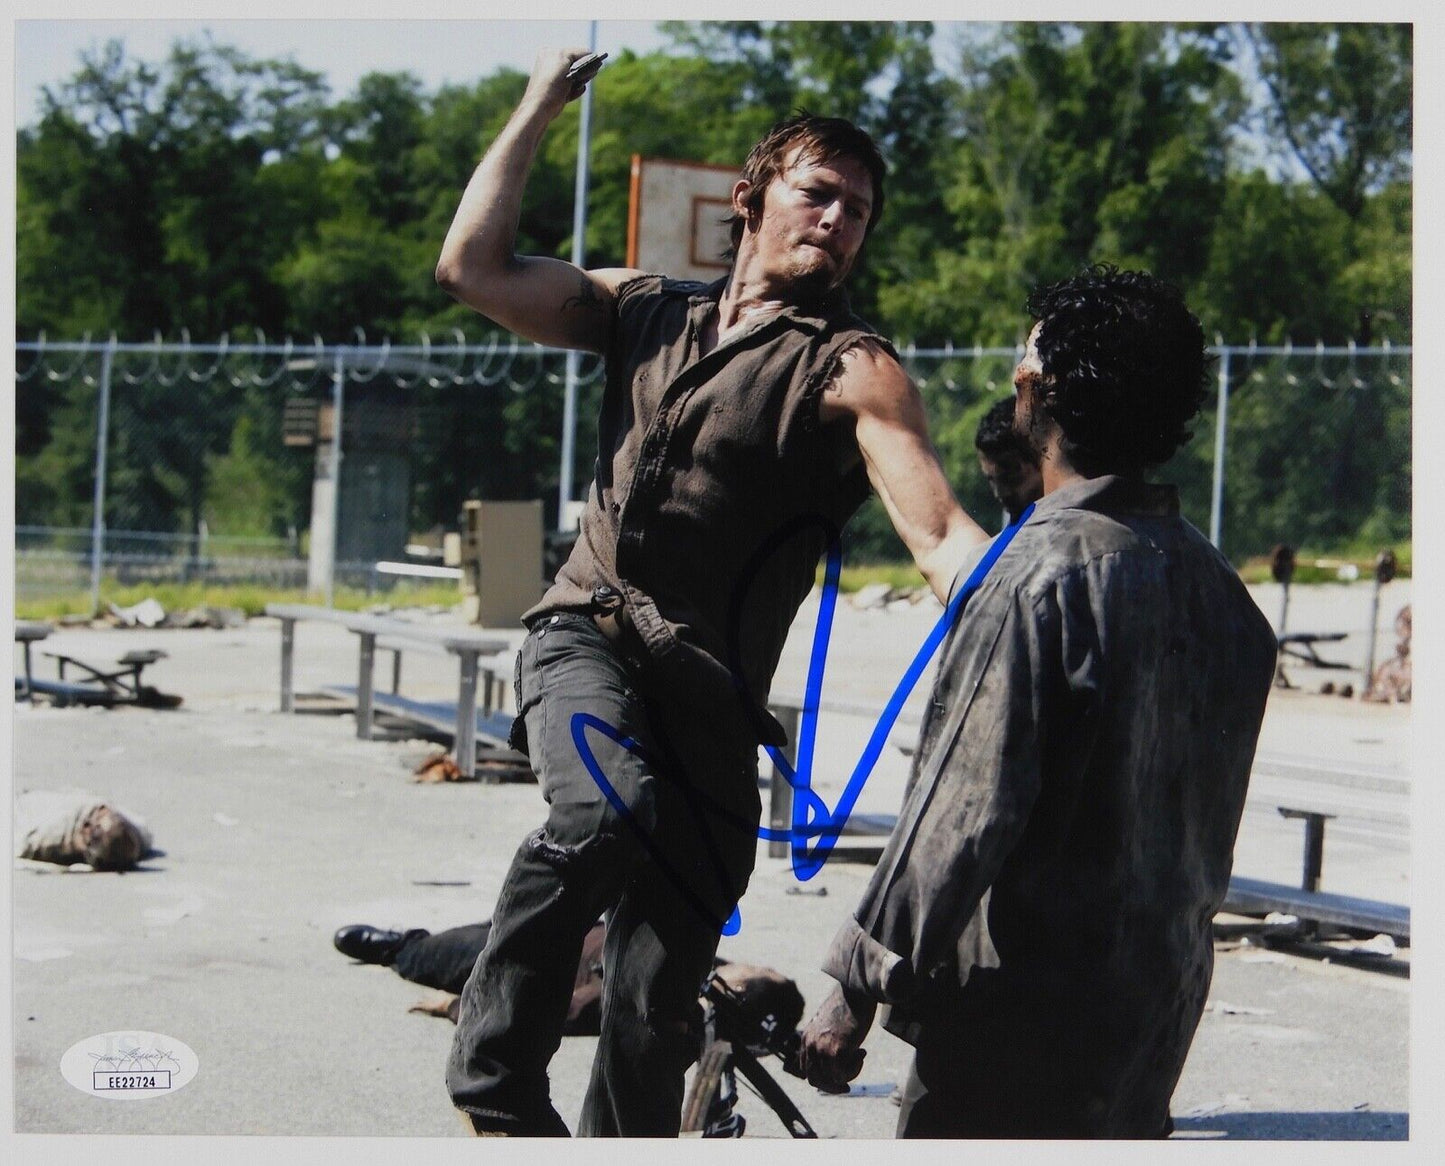 Norman Reedus Daryl The Walking Dead Autograph Signed Photo JSA 8 x 10